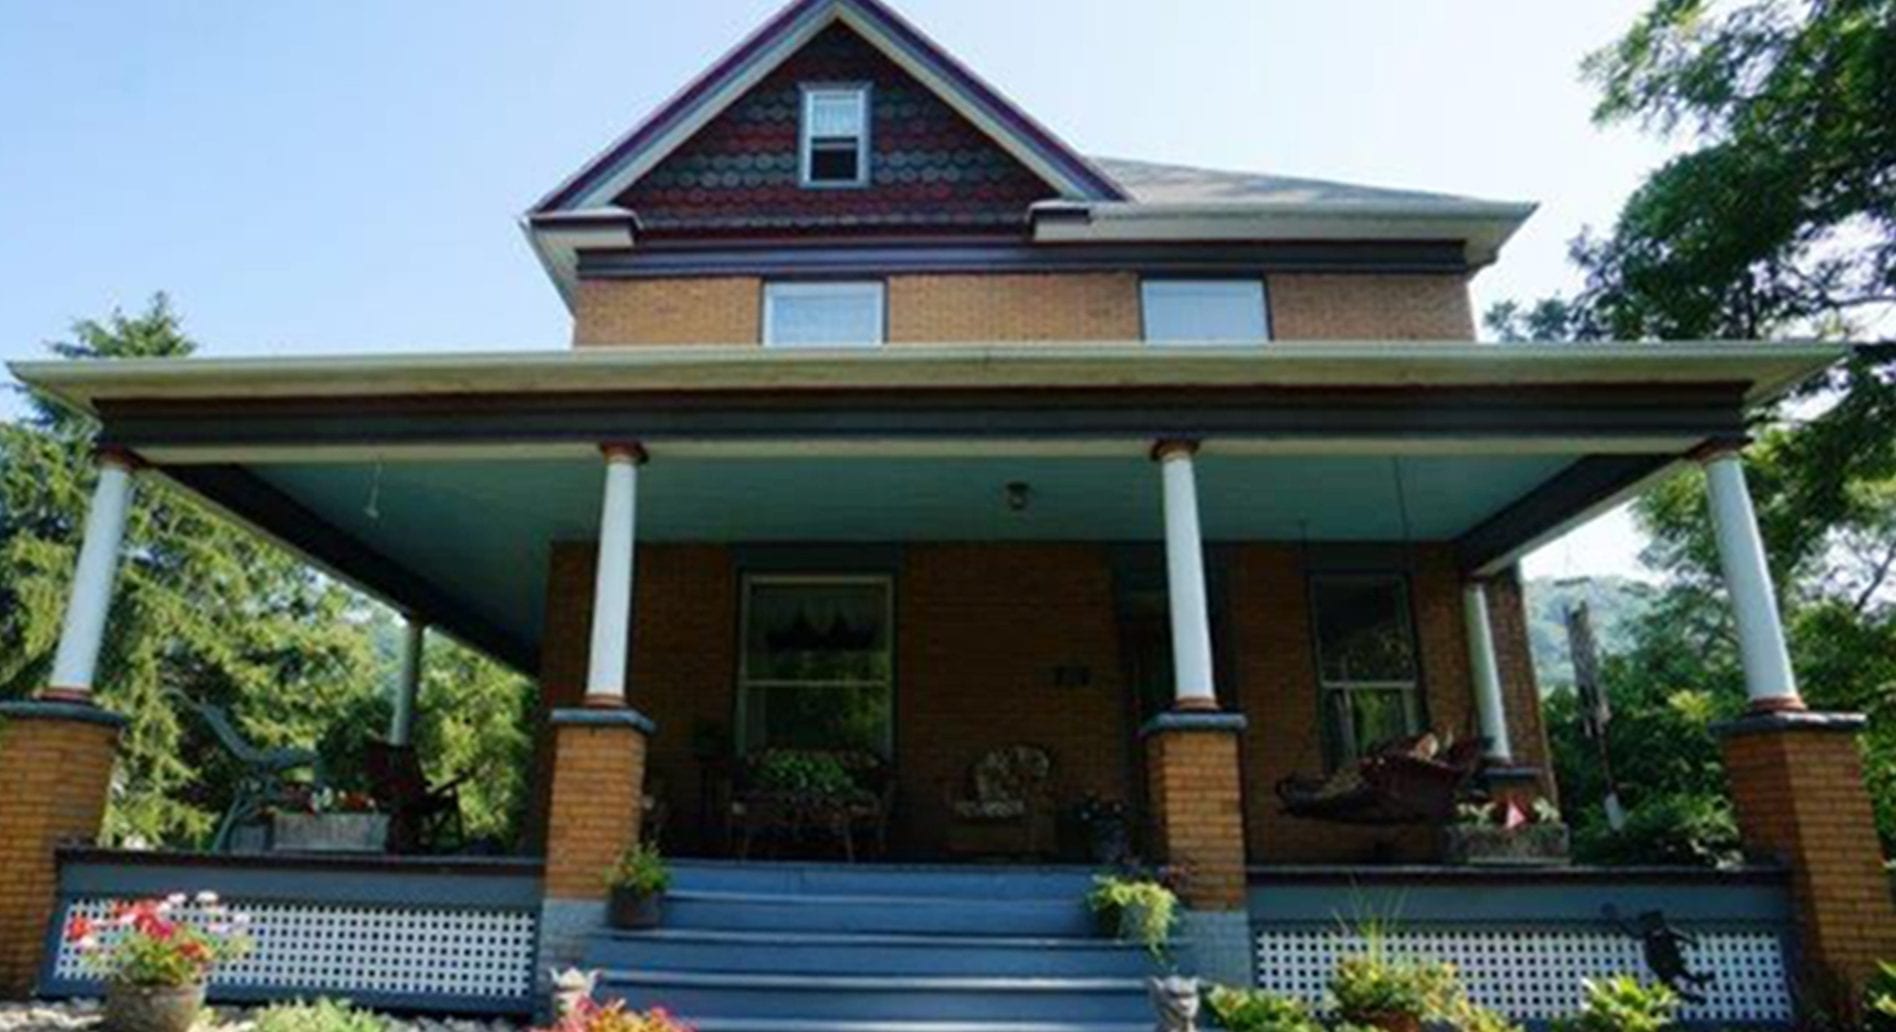 Murder House From ‘Silence Of The Lambs’ Becomes A Bed & Breakfast